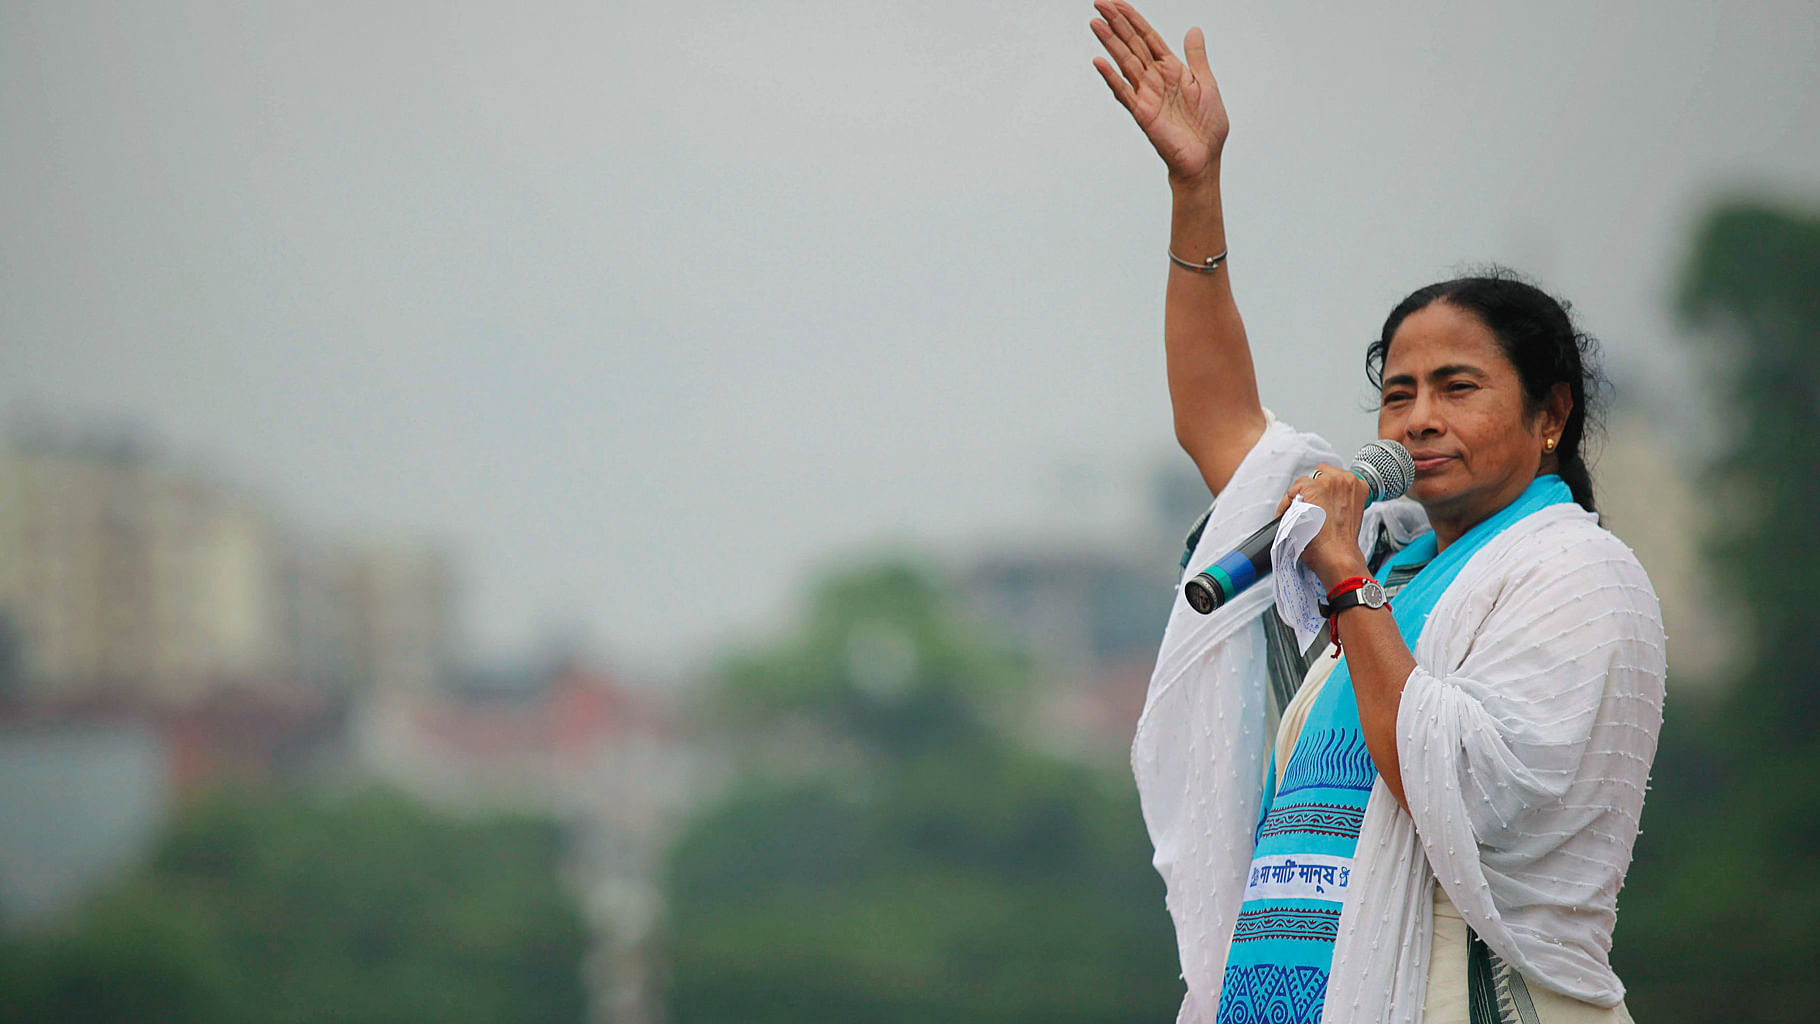 

West Bengal Chief Minister Mamata Banerjee. (Photo: Reuters)